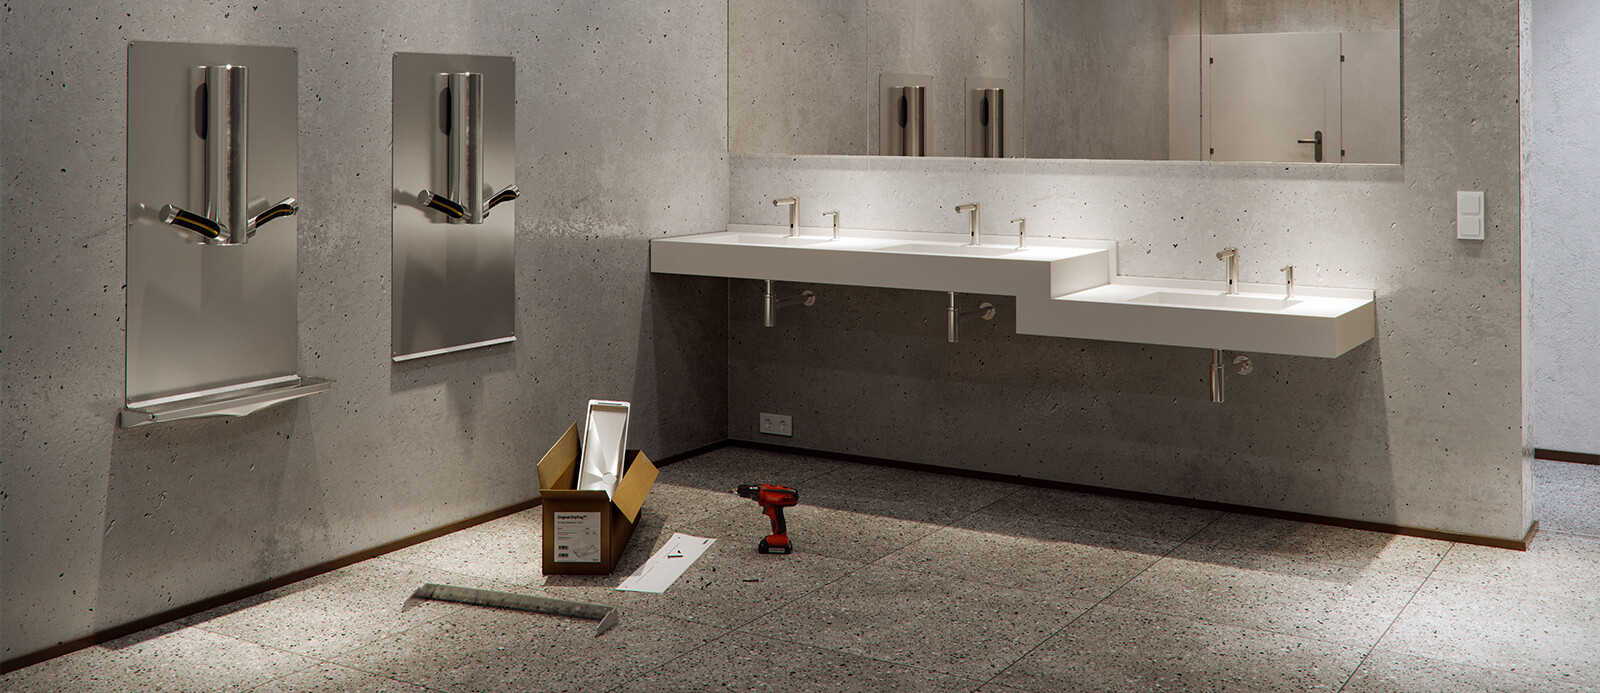 A bathroom made out of stone, with 2 Dyson Airblade Hand Dryers hanging on the wall next to each other and a drilling machine with some spare parts in a cardboard box standing in front of it on the ground.